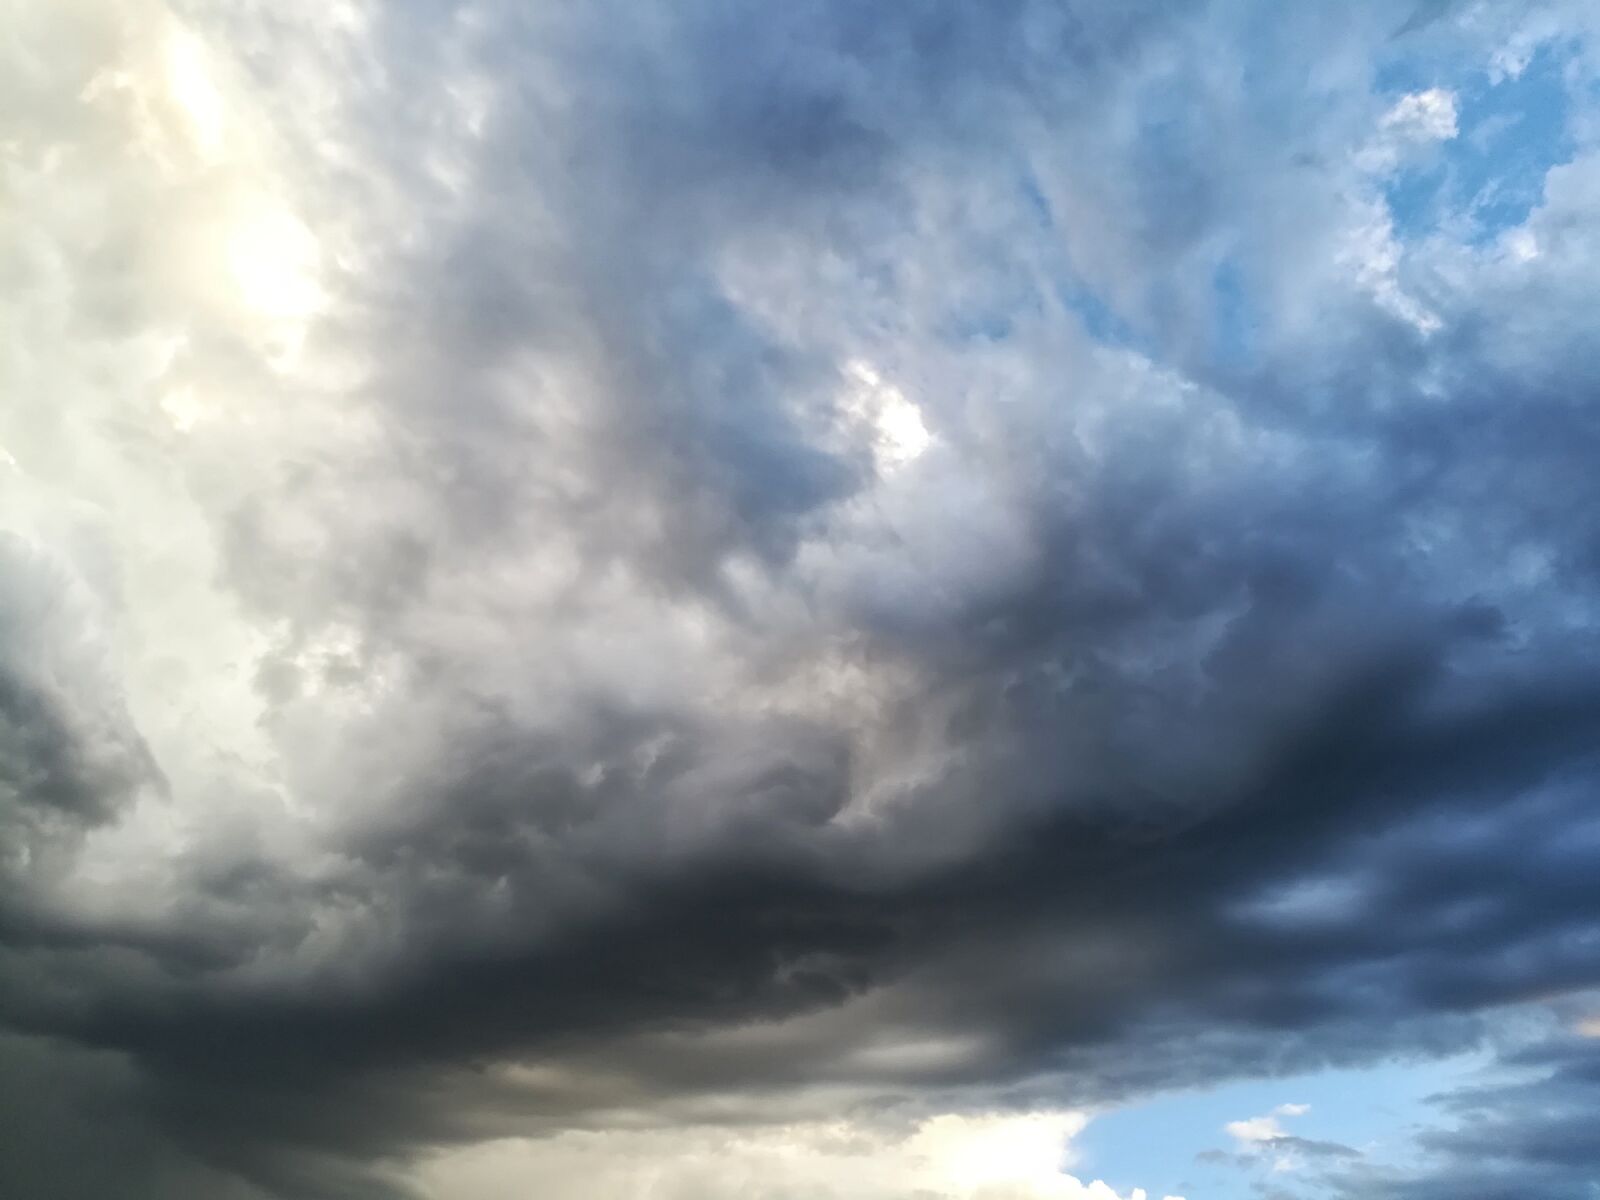 HUAWEI honor 6x sample photo. Sky, clouds, blue, storm photography